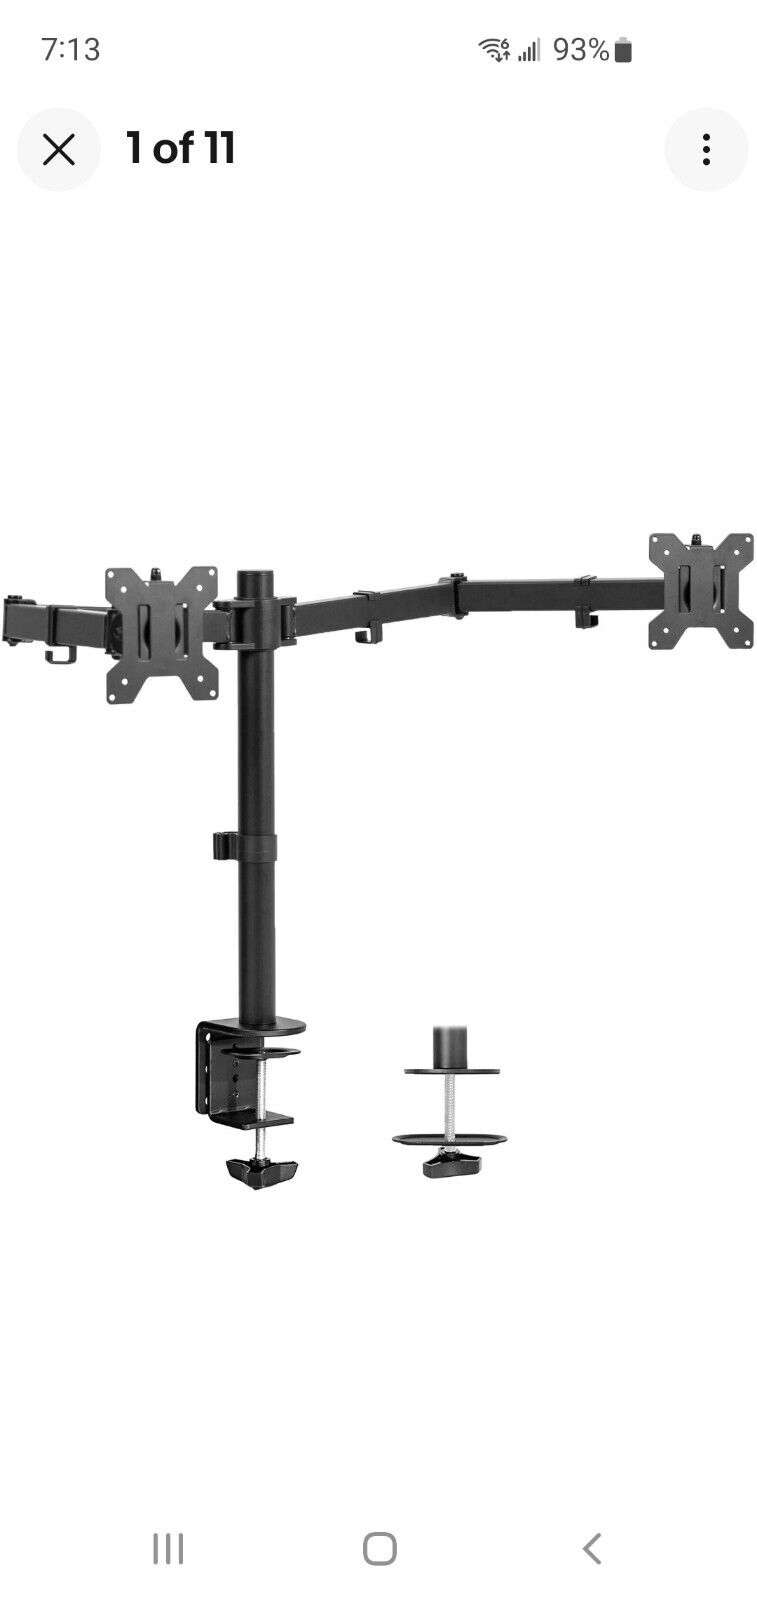 VIVO Dual Ultrawide Monitor Adjustable Desk Mount Fits 2 Screens up to 38